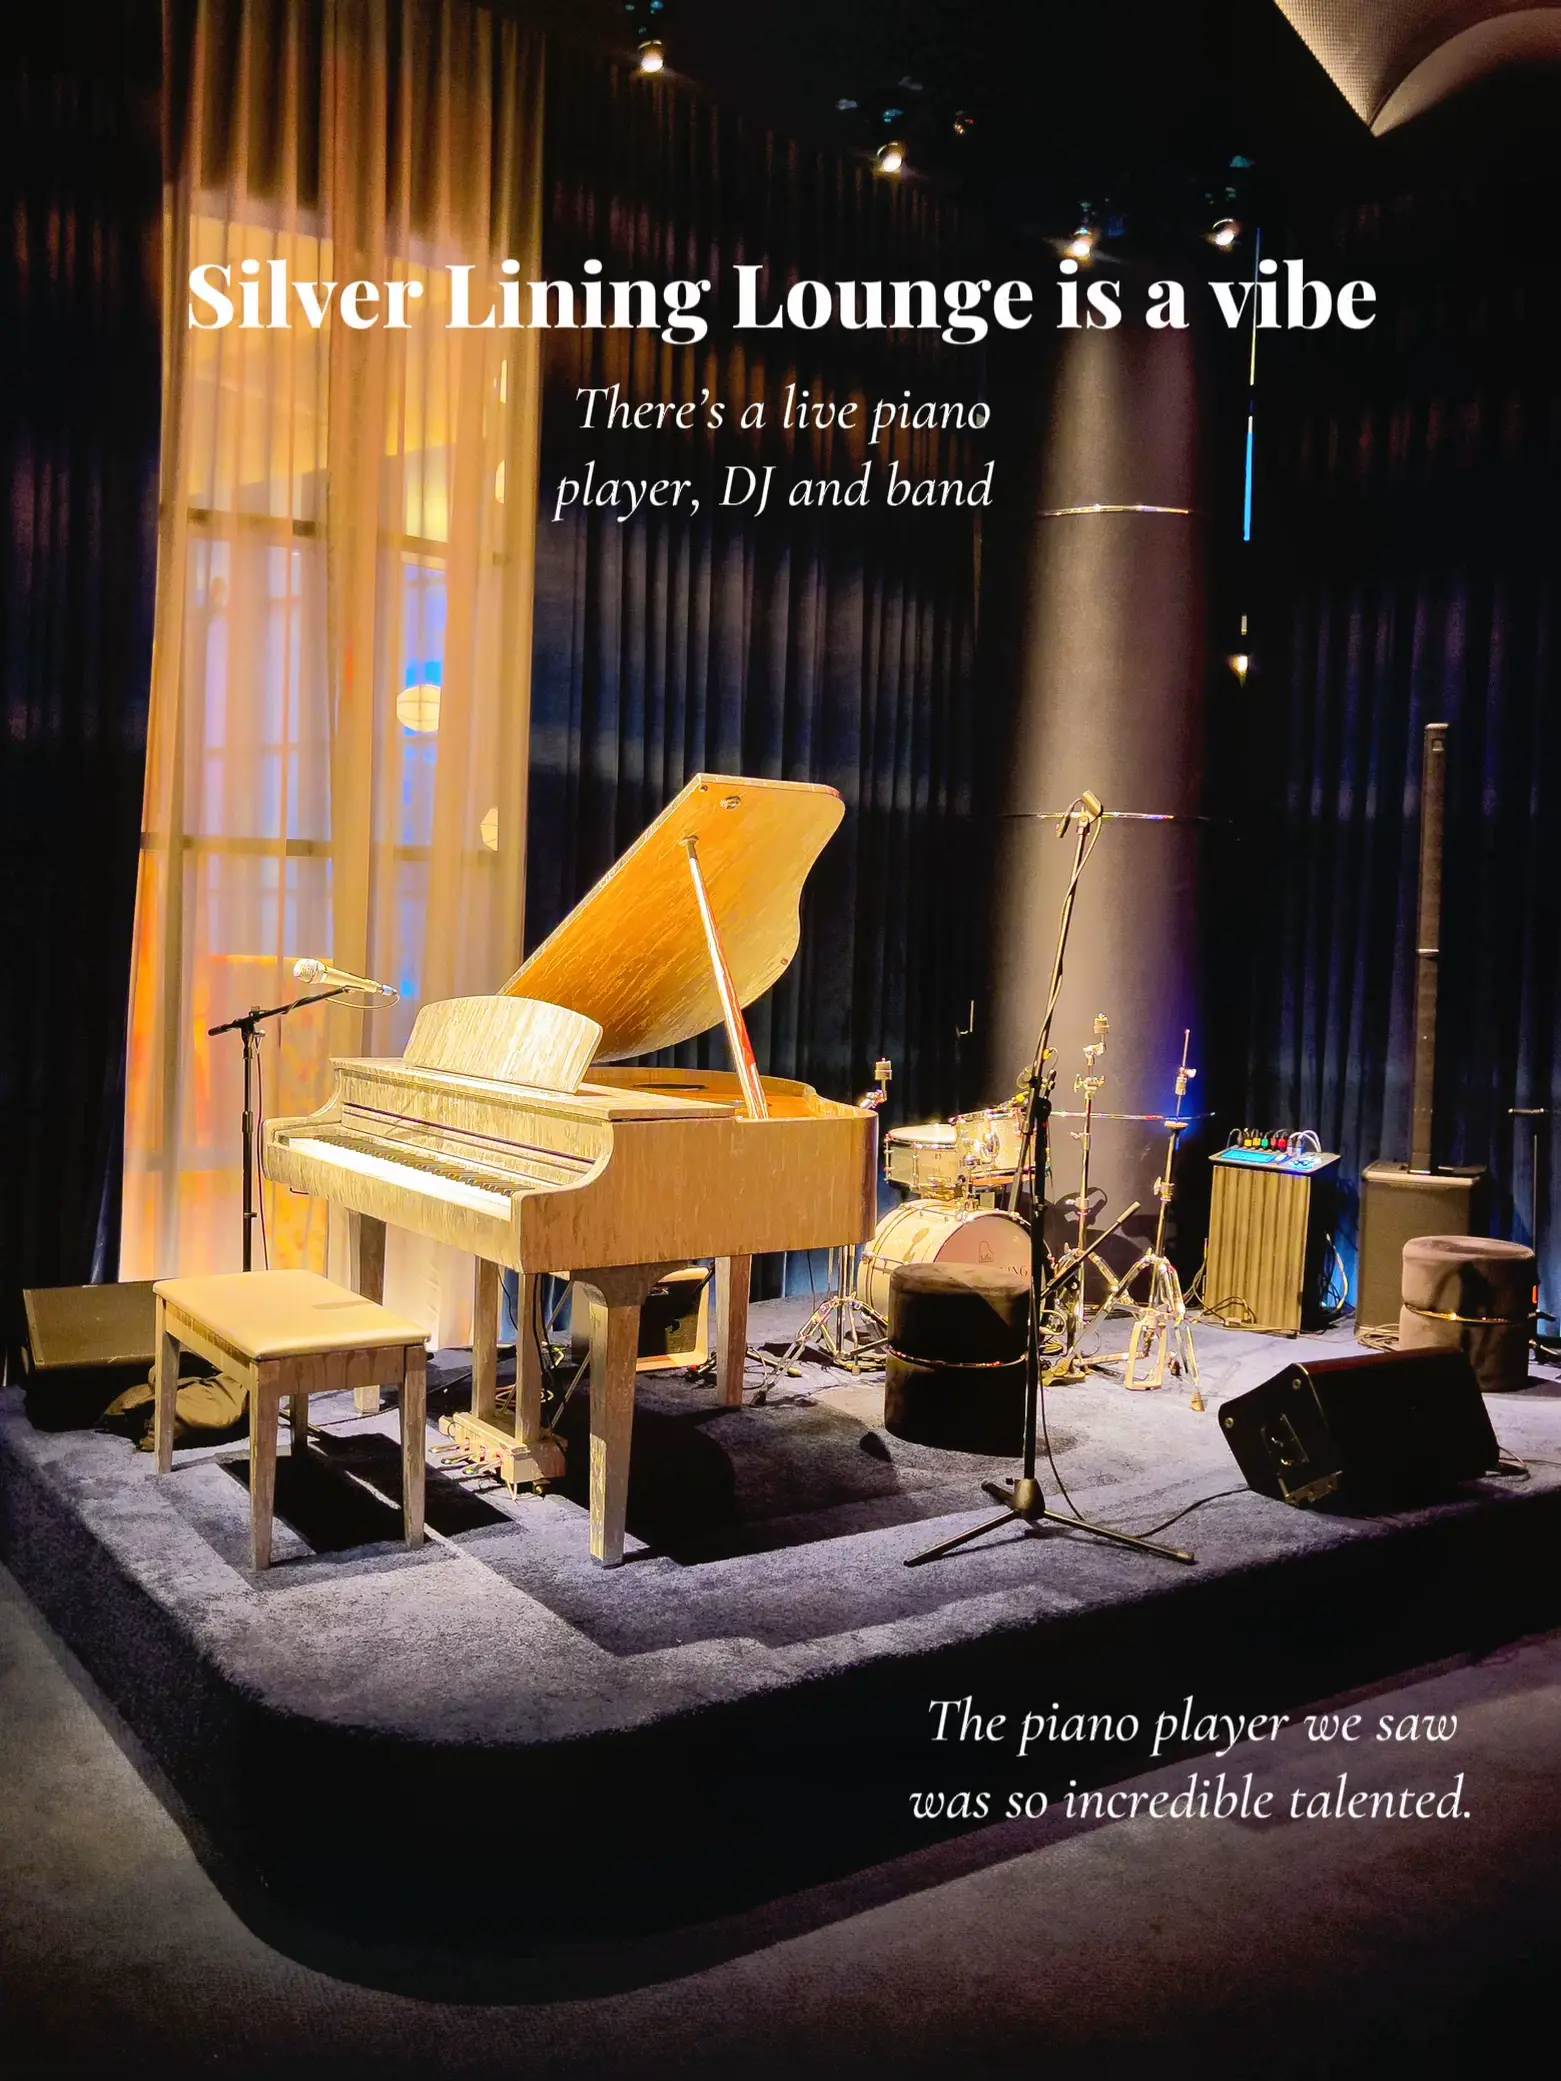 Silver Lining Lounge  Live Music Venue & Piano Bar in NYC